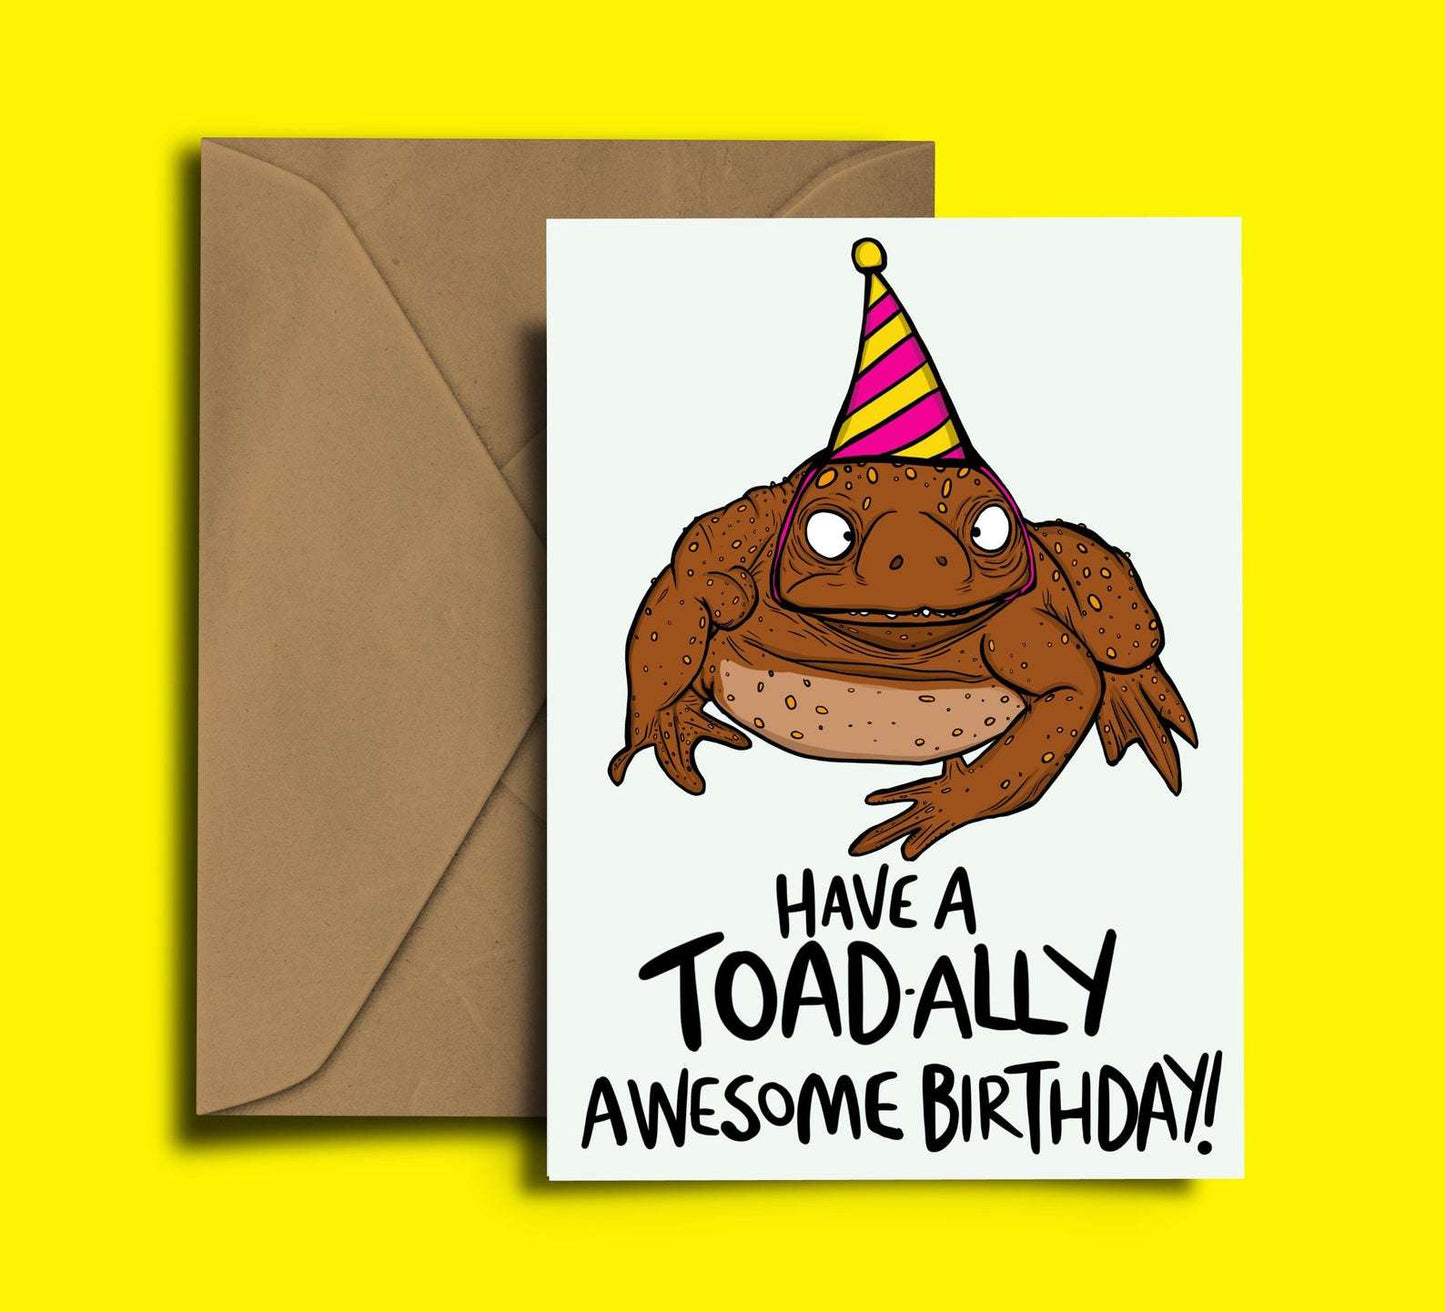 Toad-ally Awesome Birthday Greetings Card